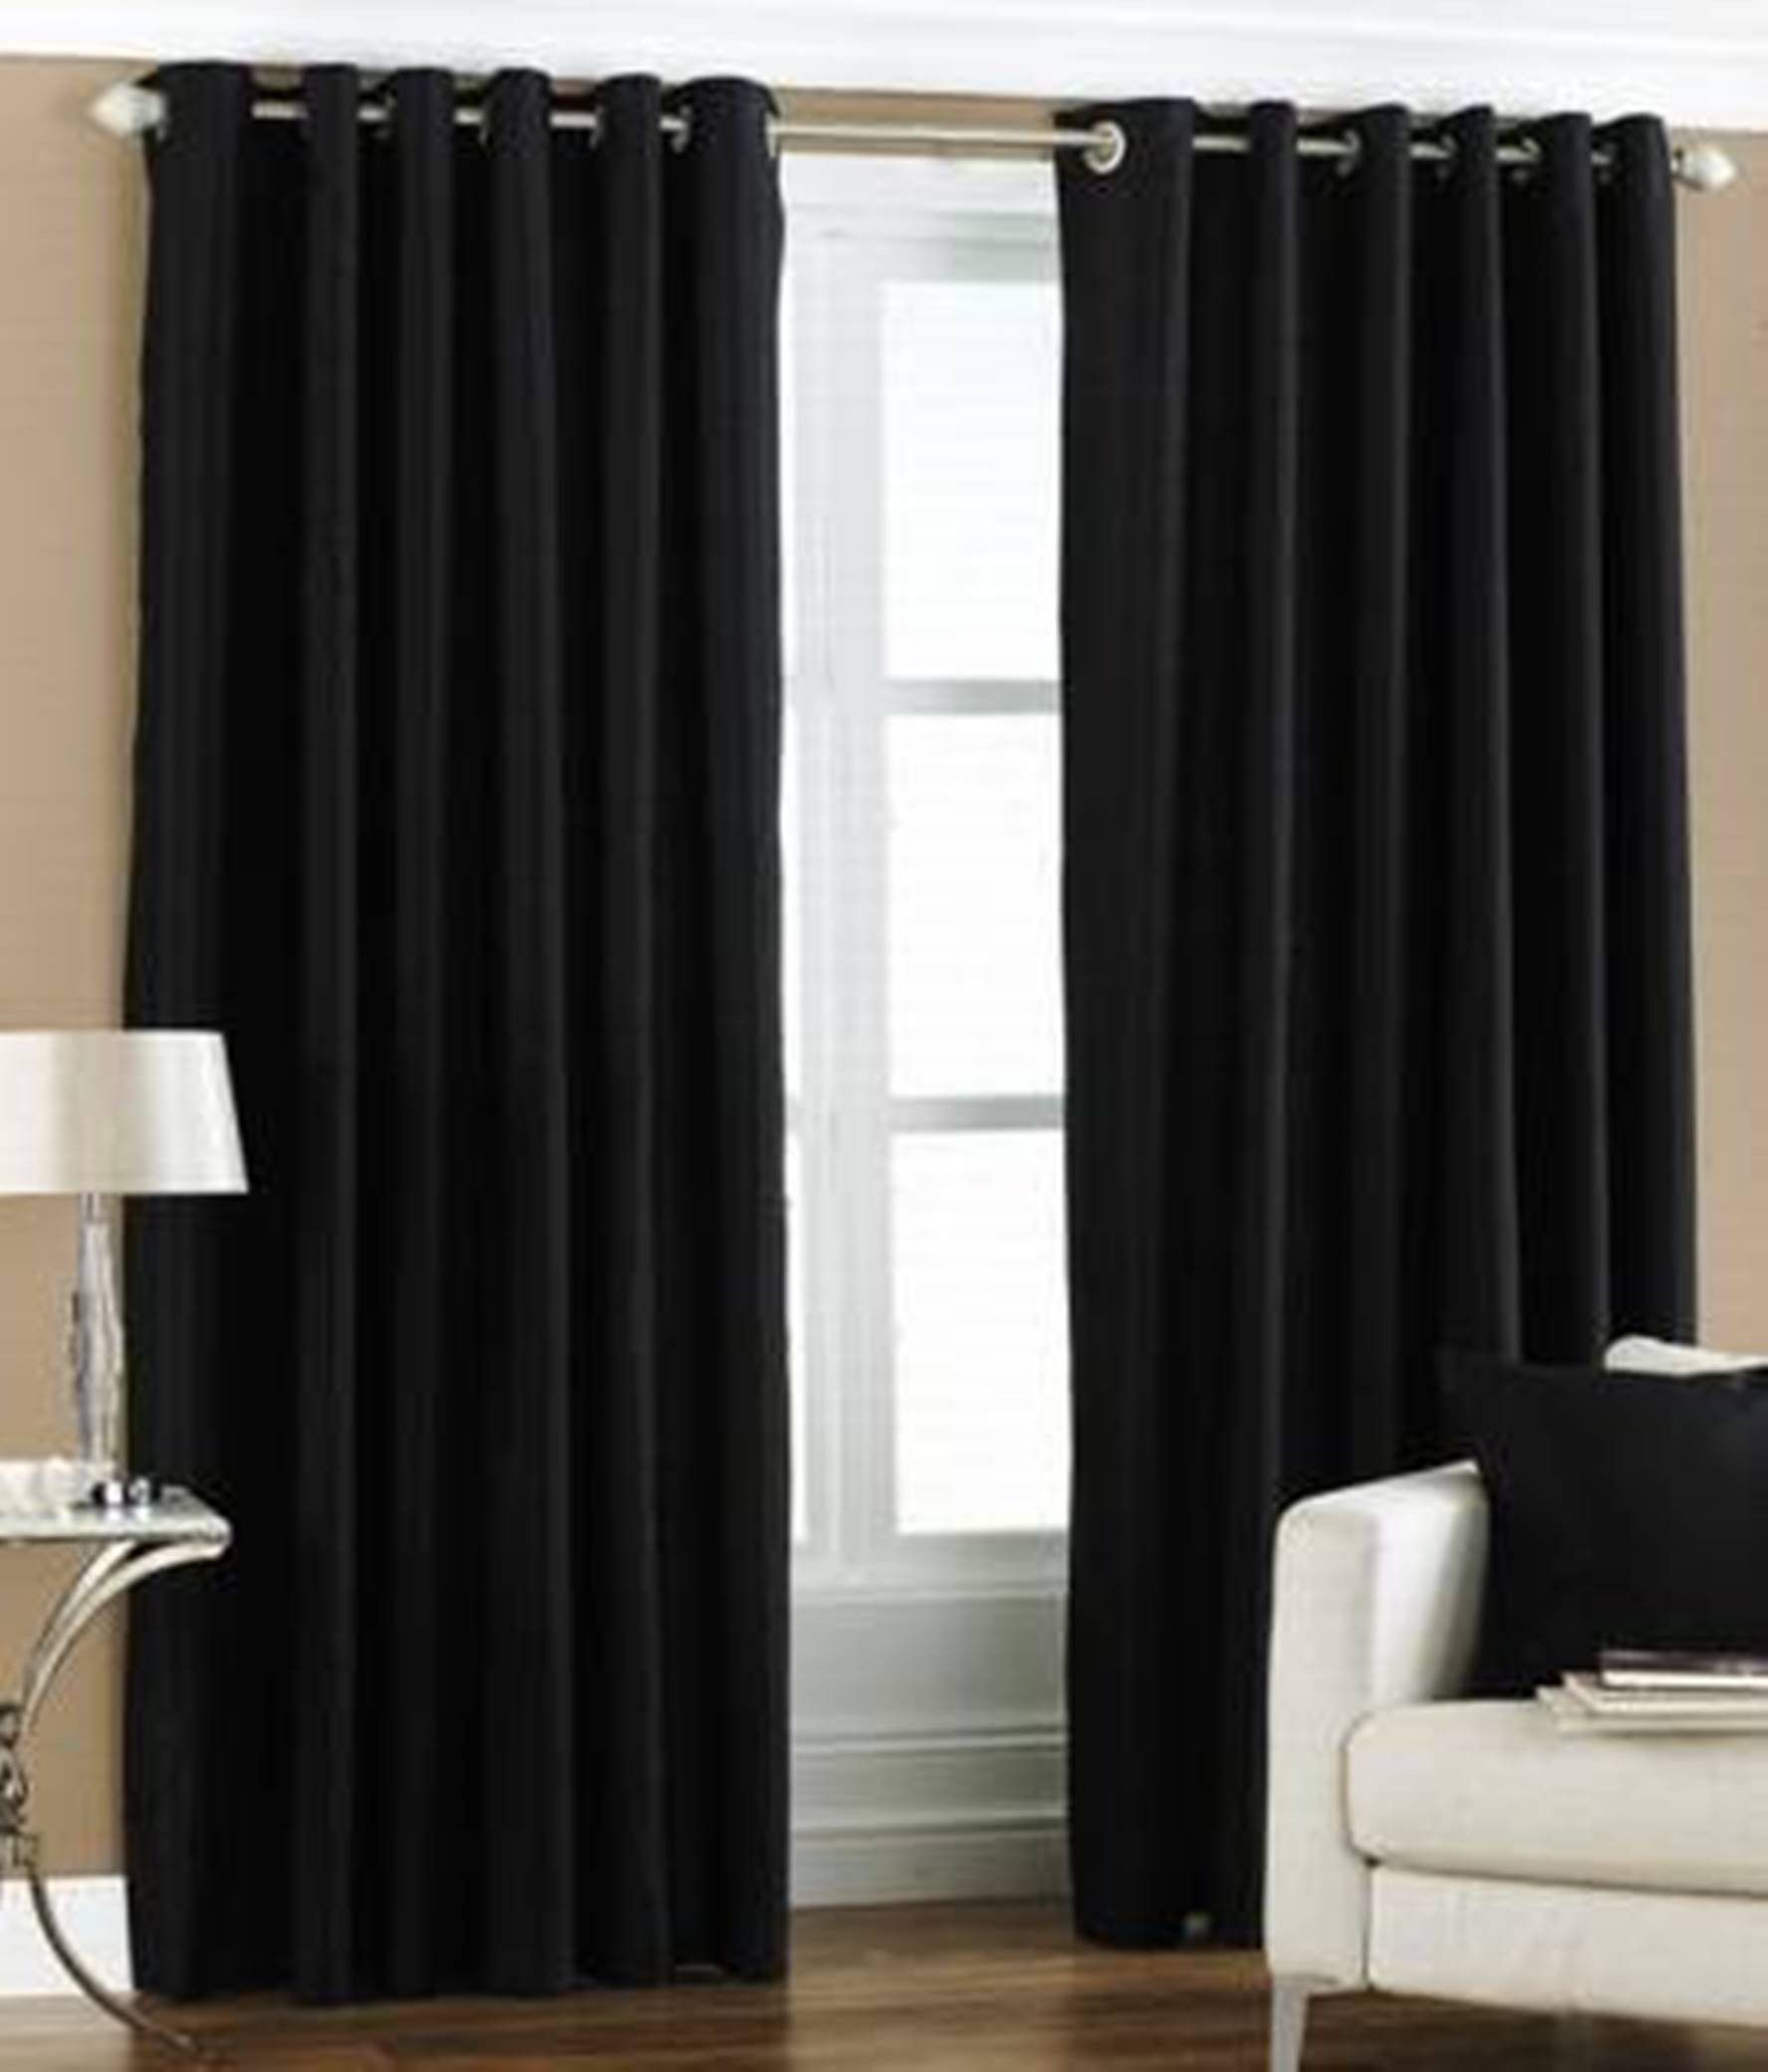     			N2C Home Solid Semi-Transparent Eyelet Curtain 9 ft ( Pack of 2 ) - Black